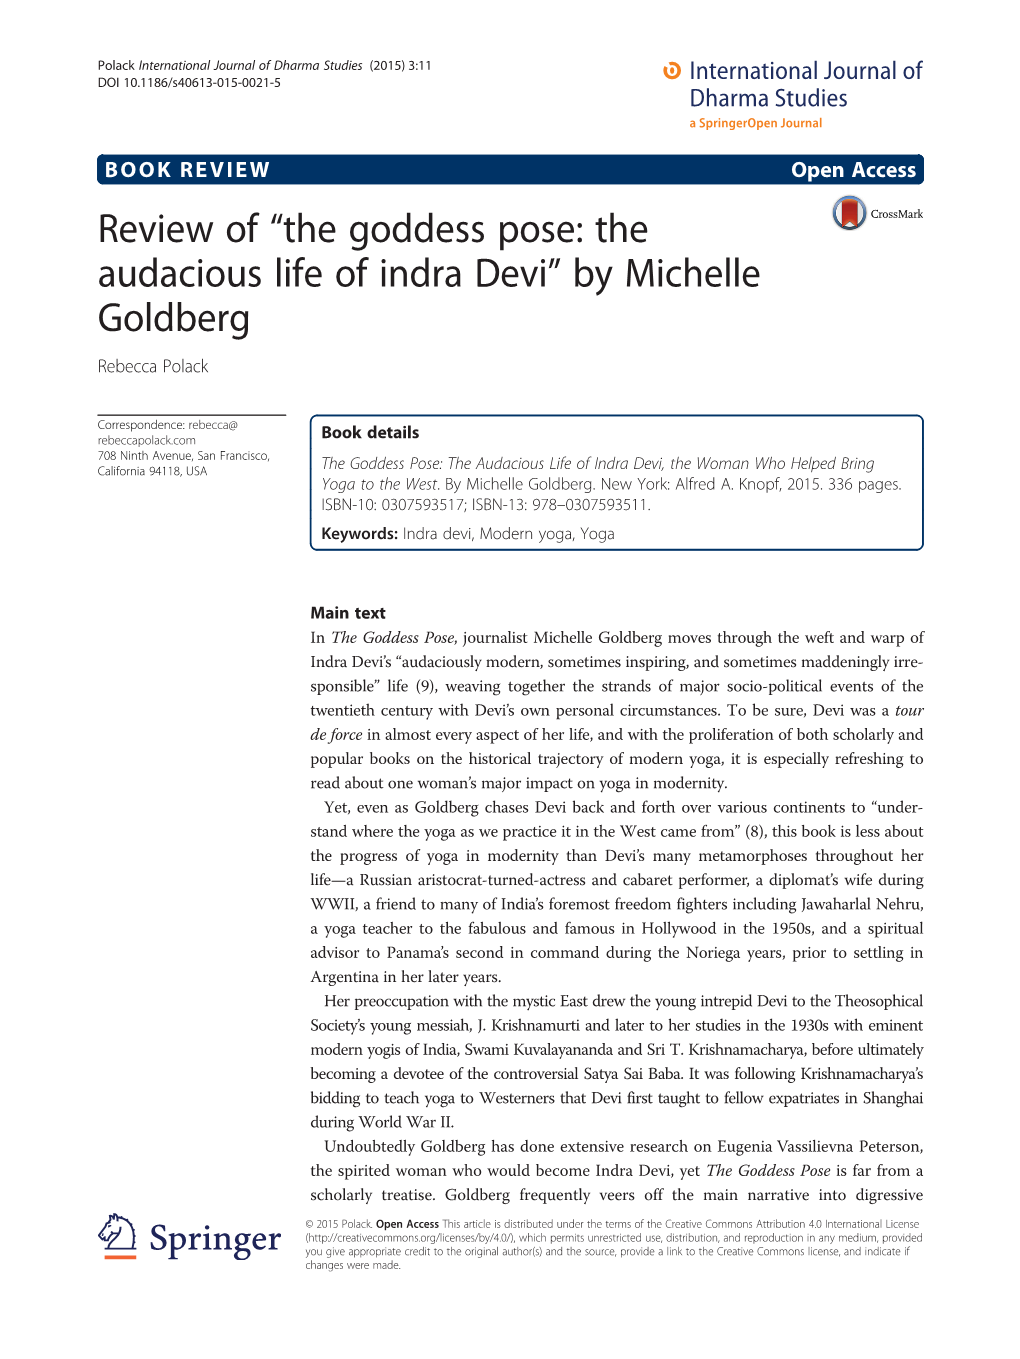 Review of “The Goddess Pose: the Audacious Life of Indra Devi” by Michelle Goldberg Rebecca Polack